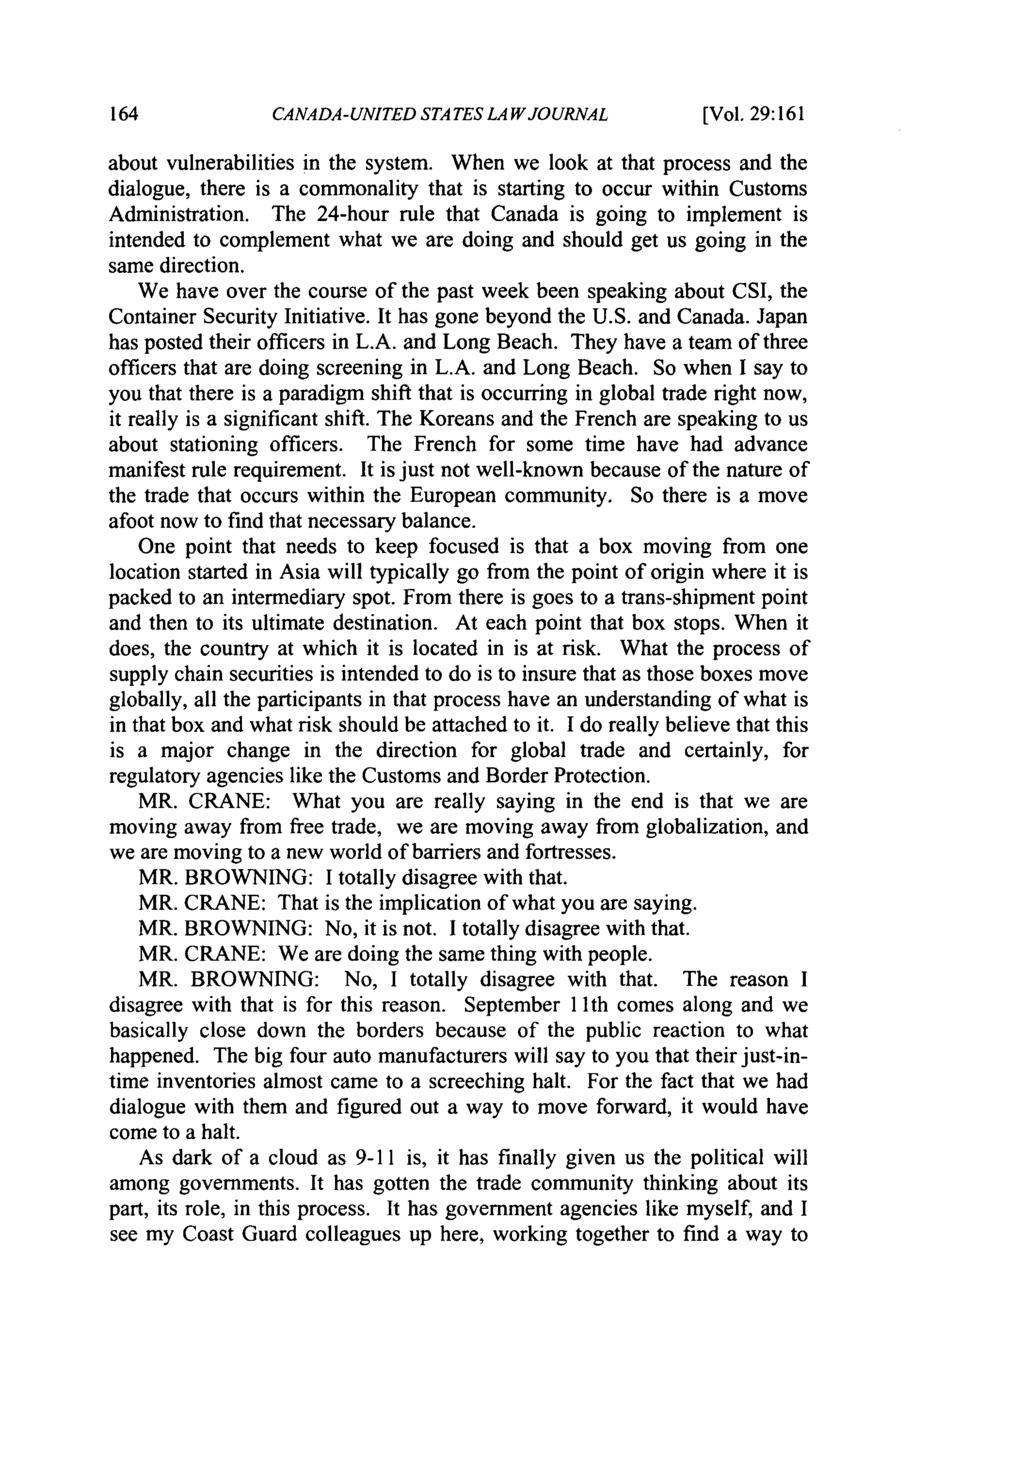 Canada-United States Law Journal, Vol. 29 [2003], Iss. 1, Art. 25 CANADA-UNITED STATES LA WJOURNAL [Vol, 29:161 about vulnerabilities in the system.